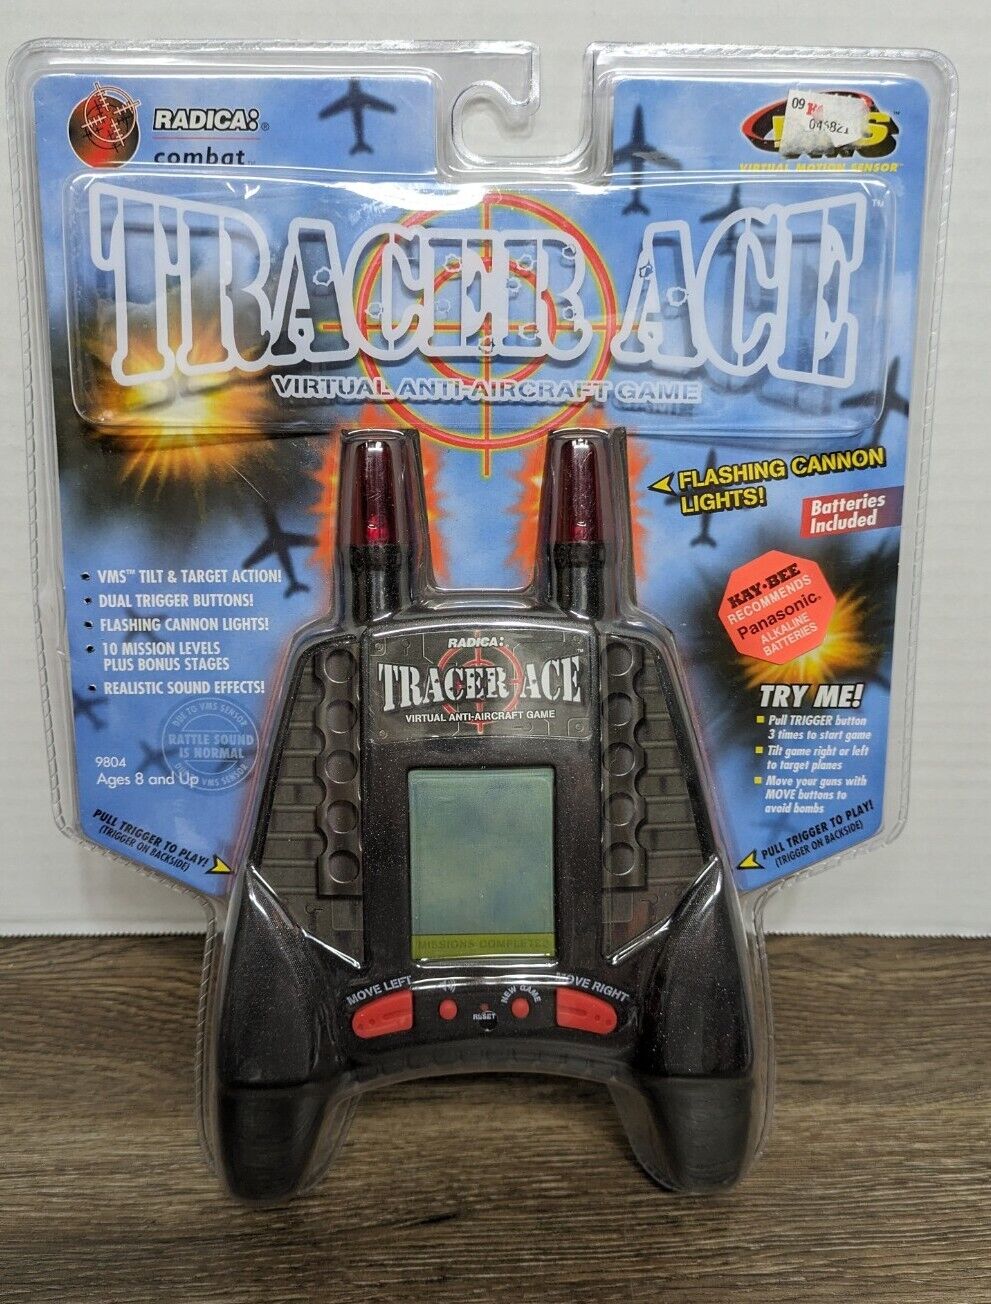 Tracer Ace Handheld LCD Handheld Electronic Game by Radica Vintage 1998 - NEW